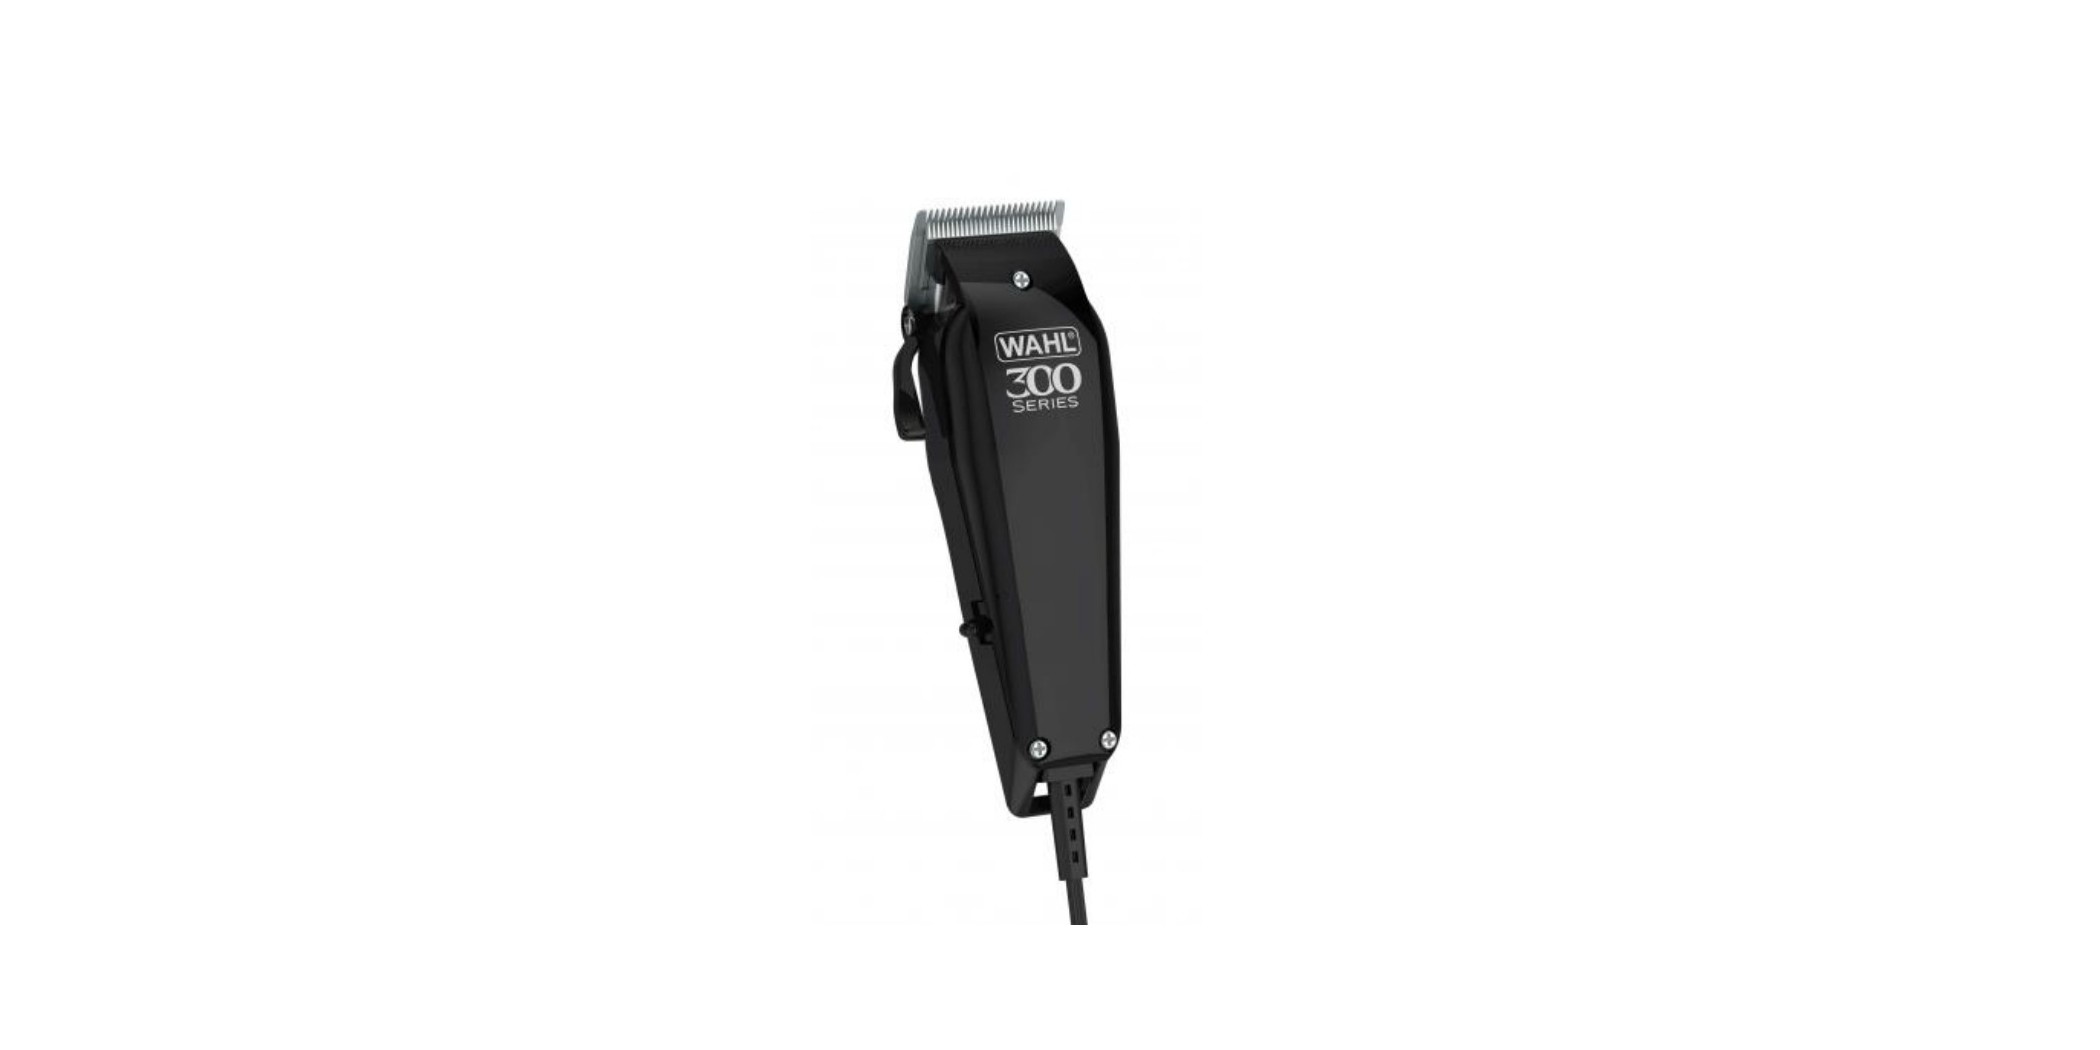 Wahl 9247-1316 HomePro 300 Series Hair Clipper